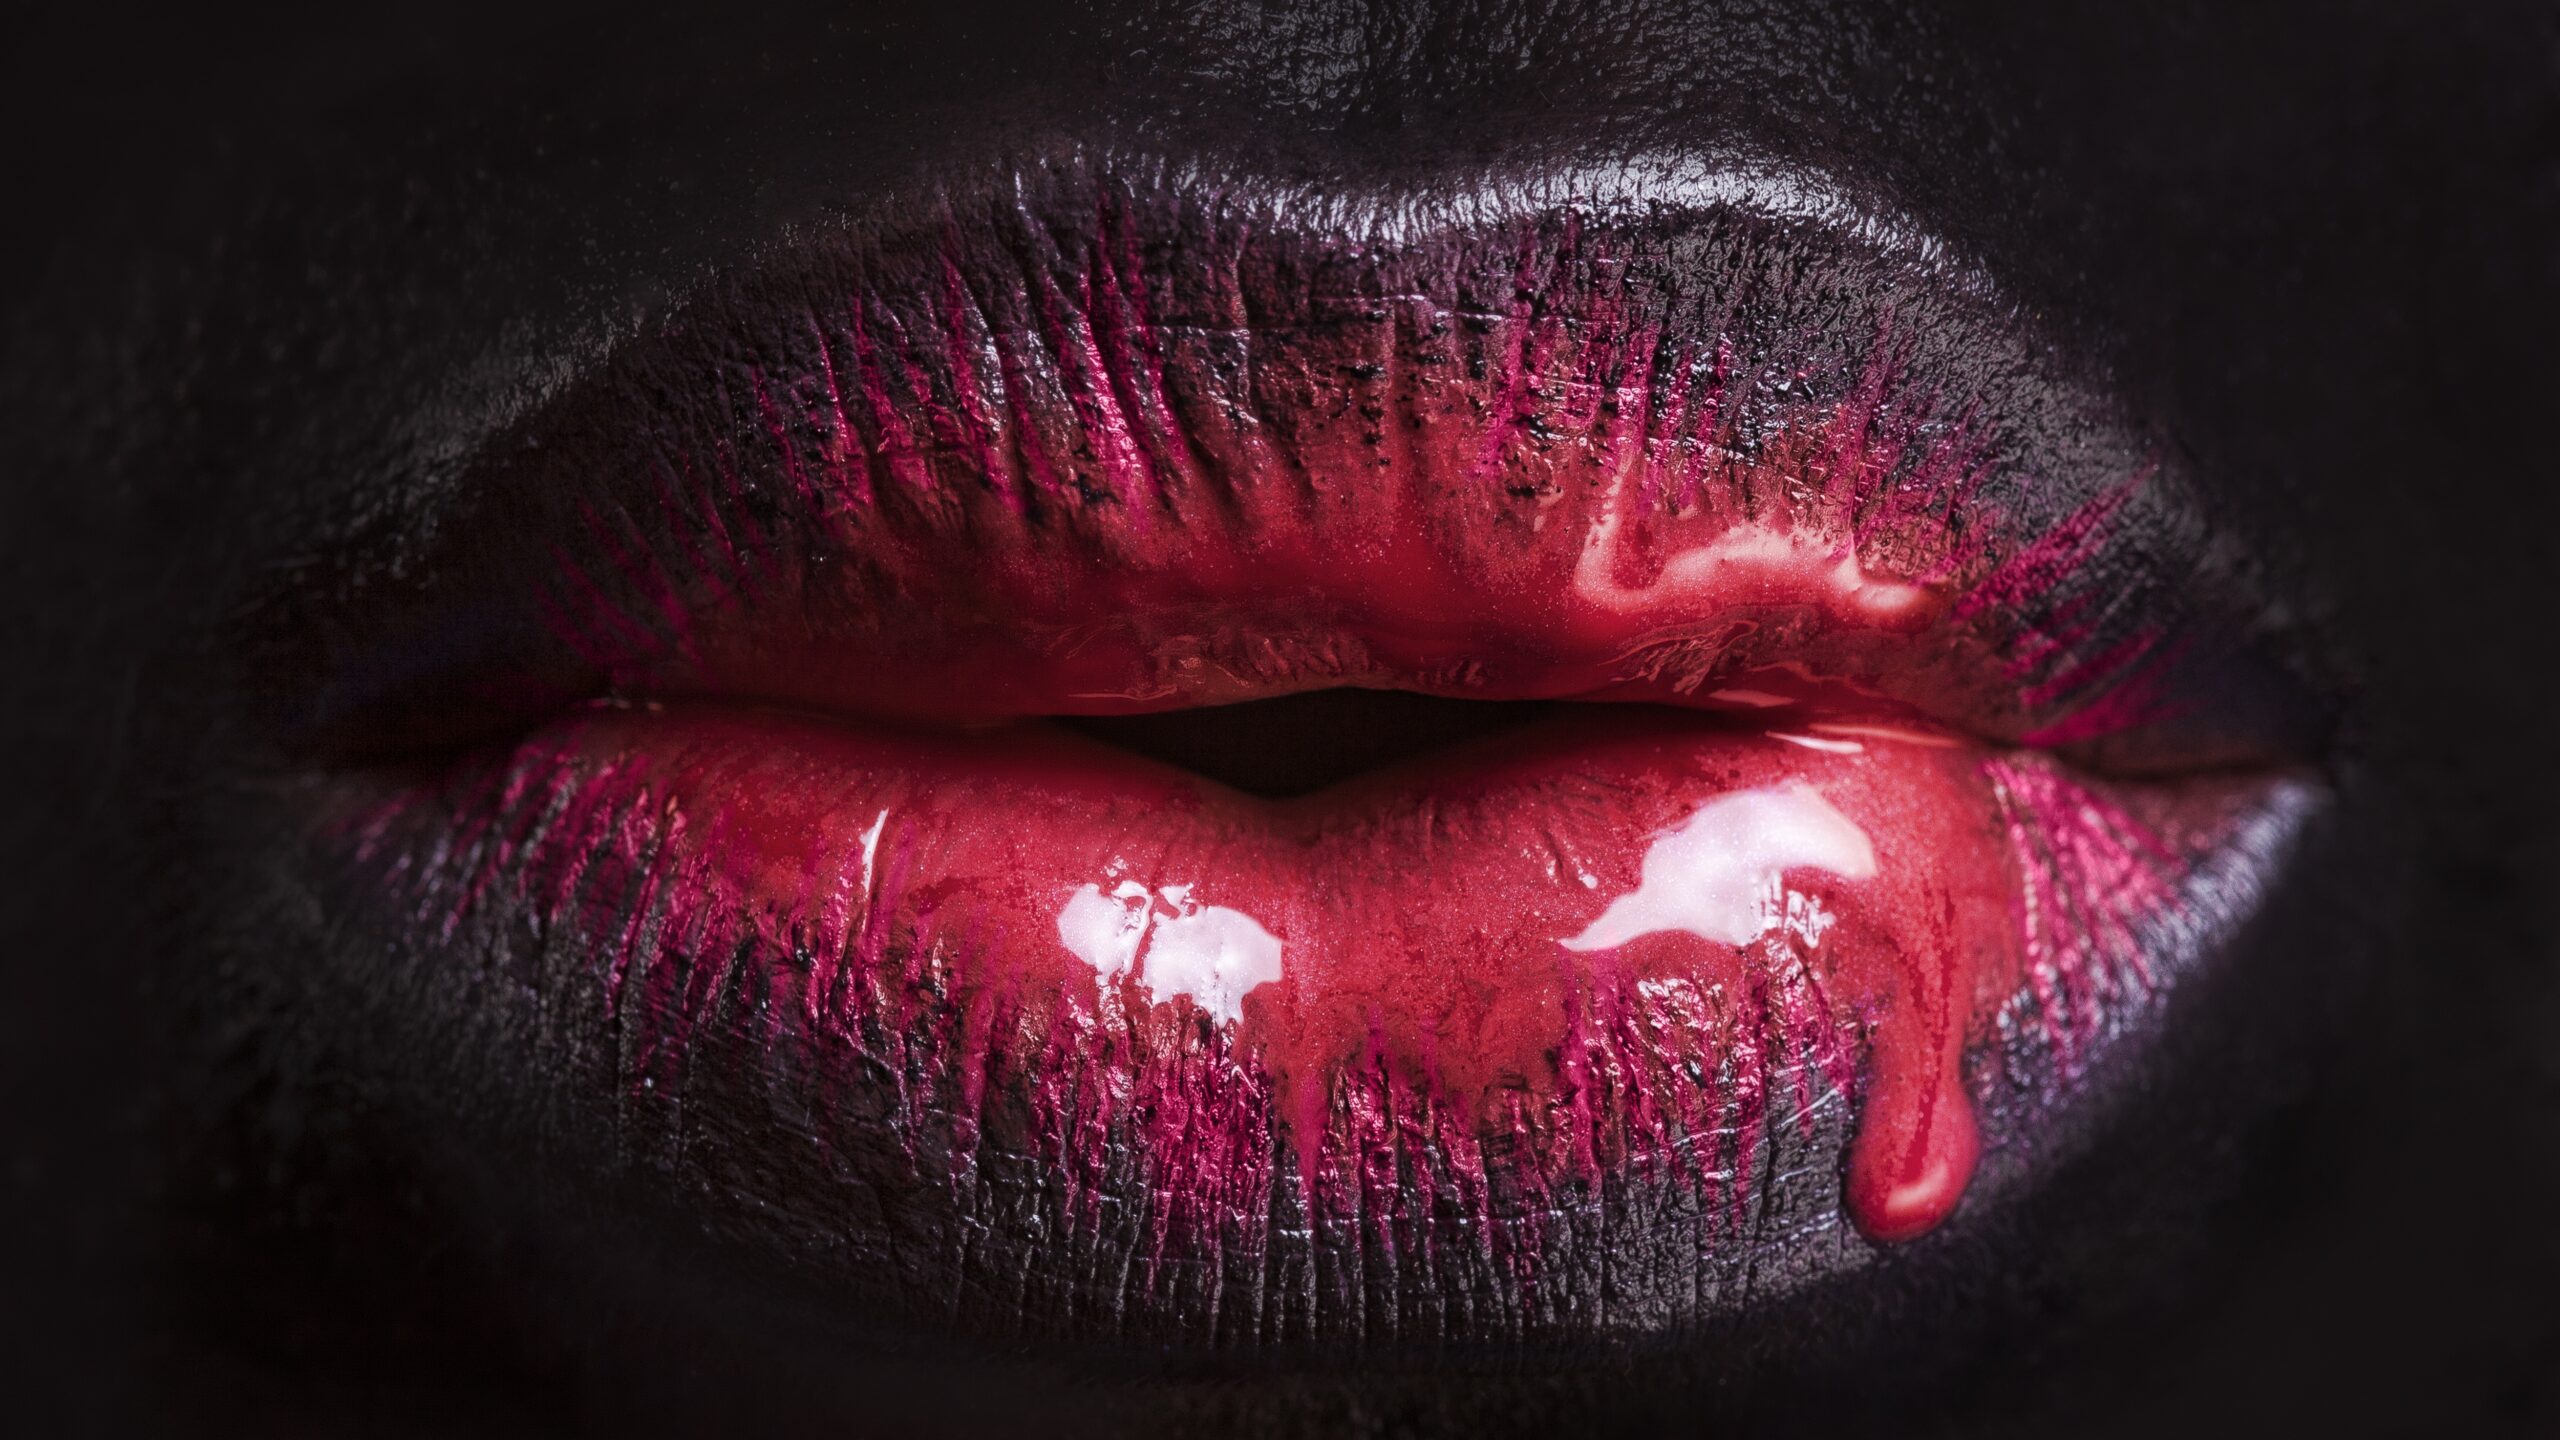 This Vampire Lips Tutorial Will Have You Ready For A Party In Count Dracula’s Castle